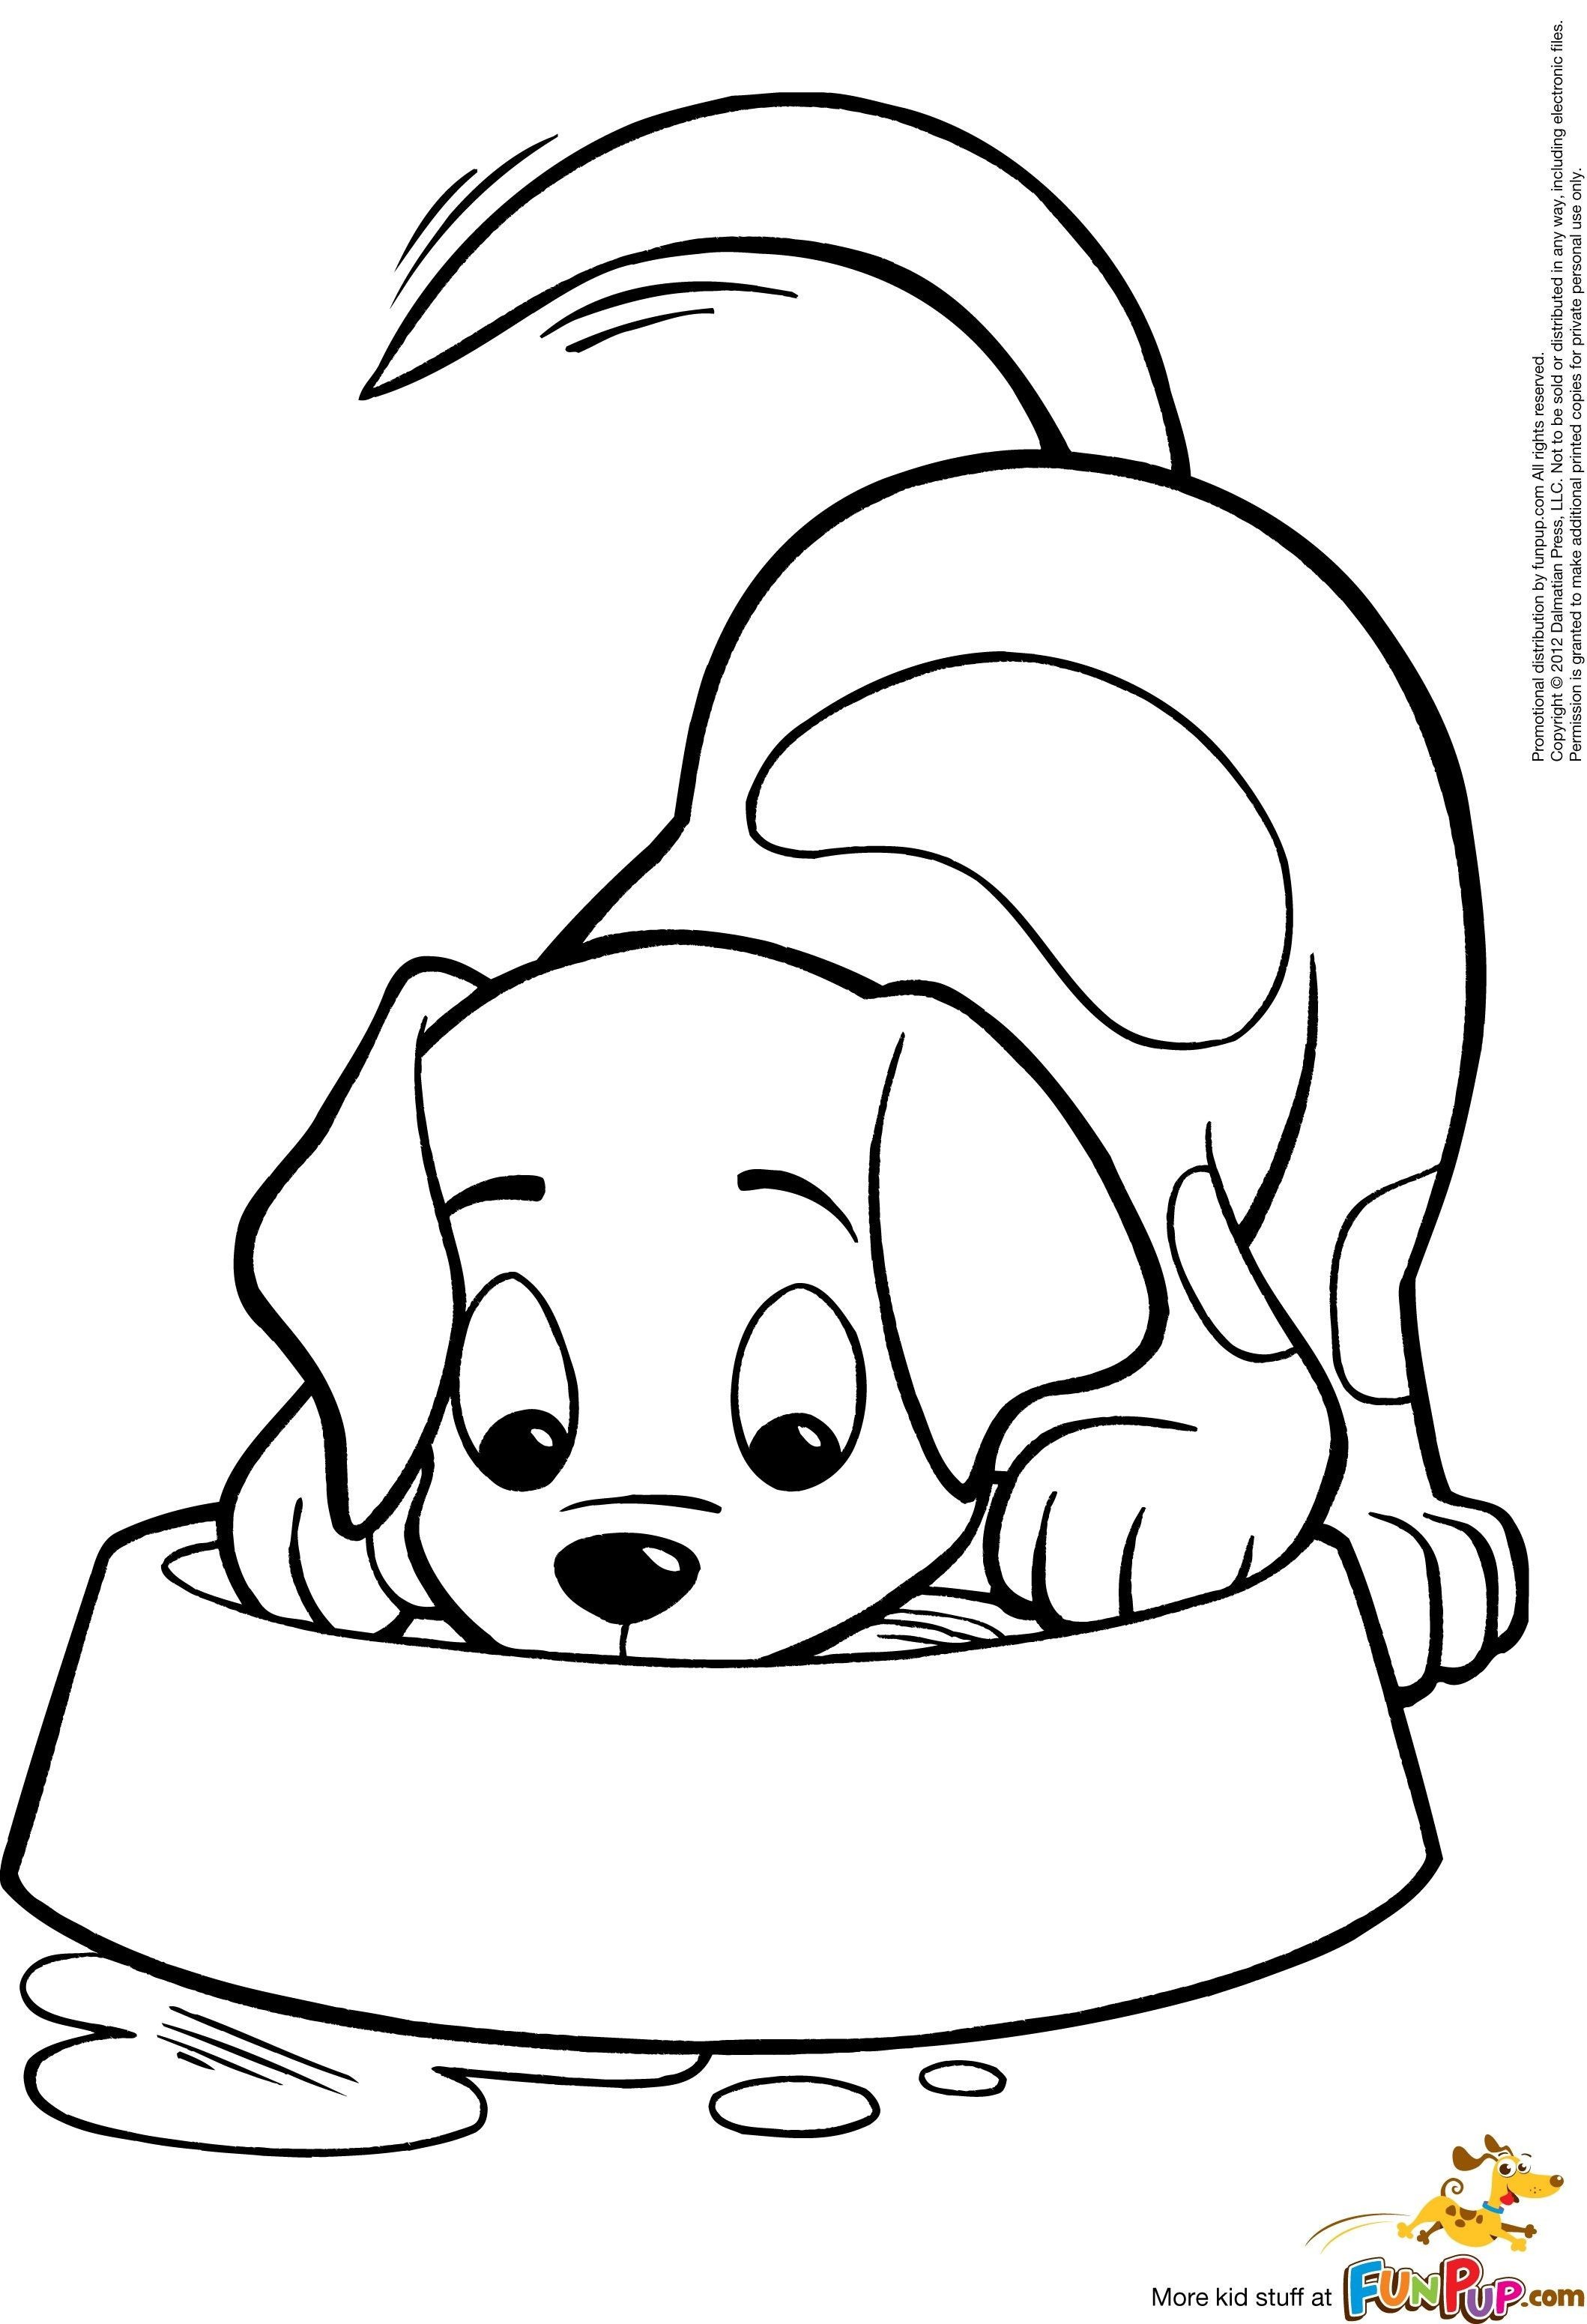 Puppies Coloring Pages to Print Wallpaper